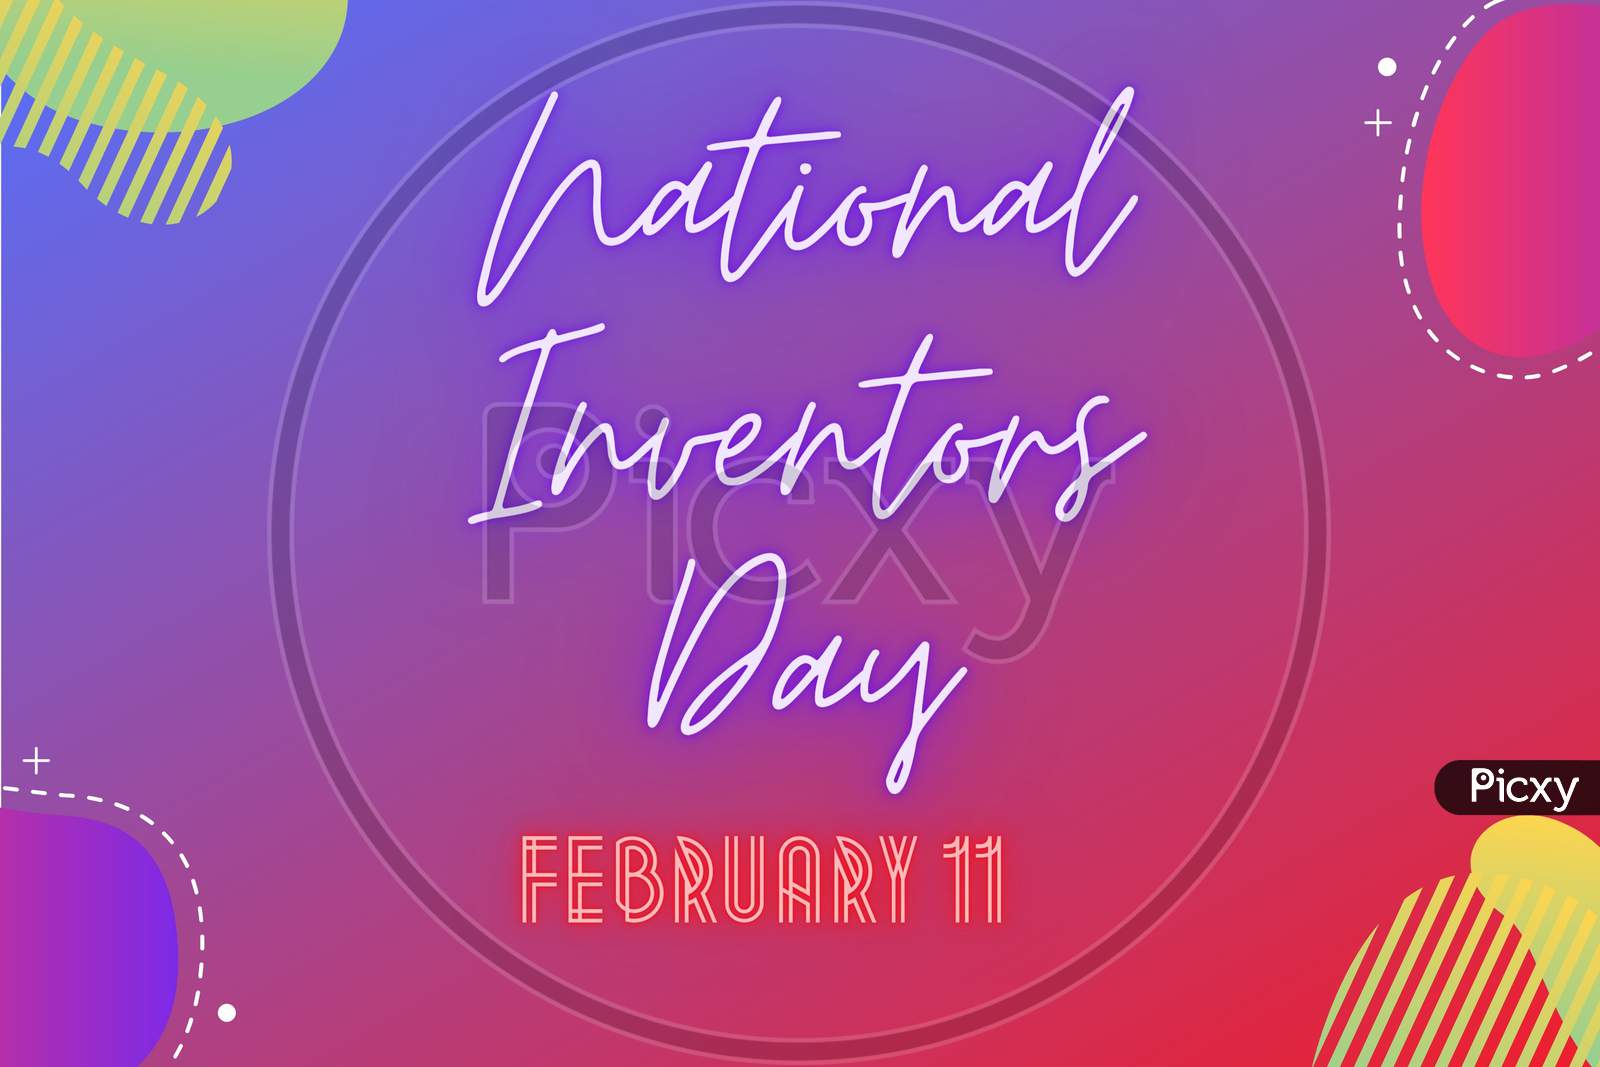 National Inventors' Day February 11. Holiday Concept. Template For Background, Banner, Card, Poster With Text